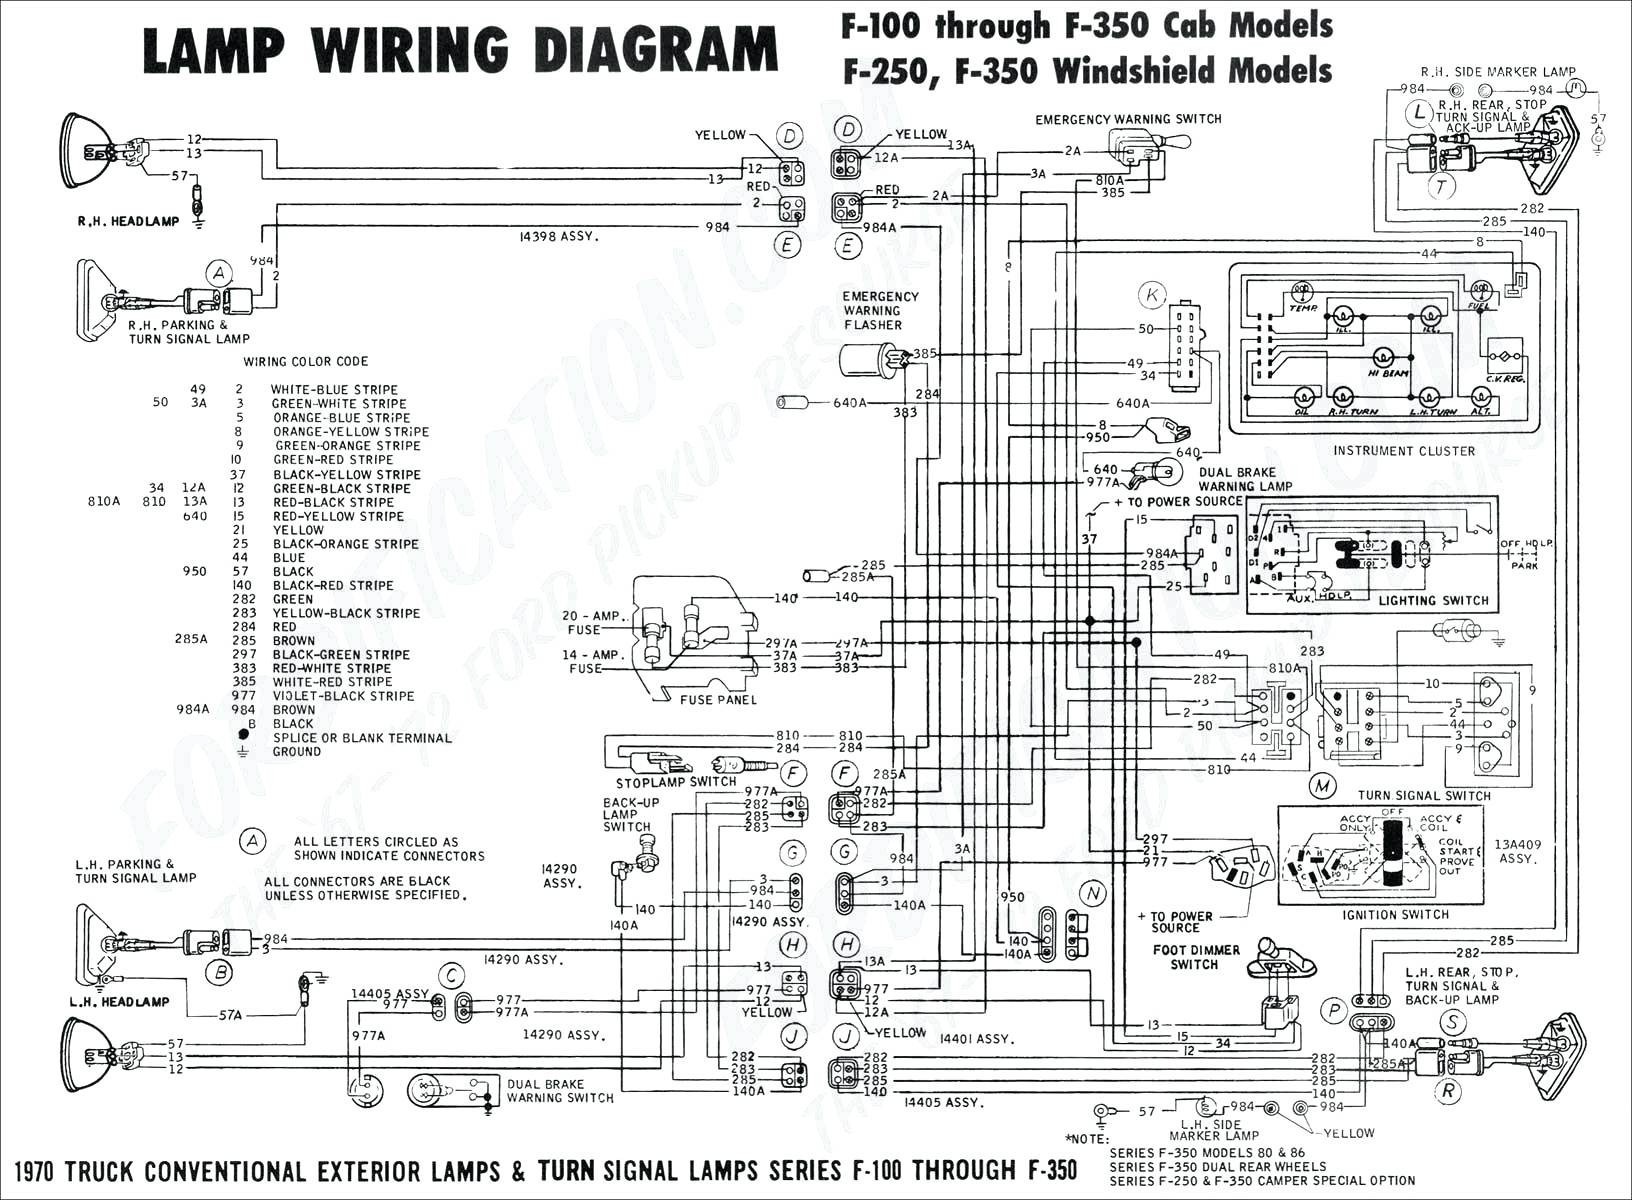 Wiring Diagram Bose Amp Valid Part 59 Find Out Information About Amplifier Wiring Diagrams How